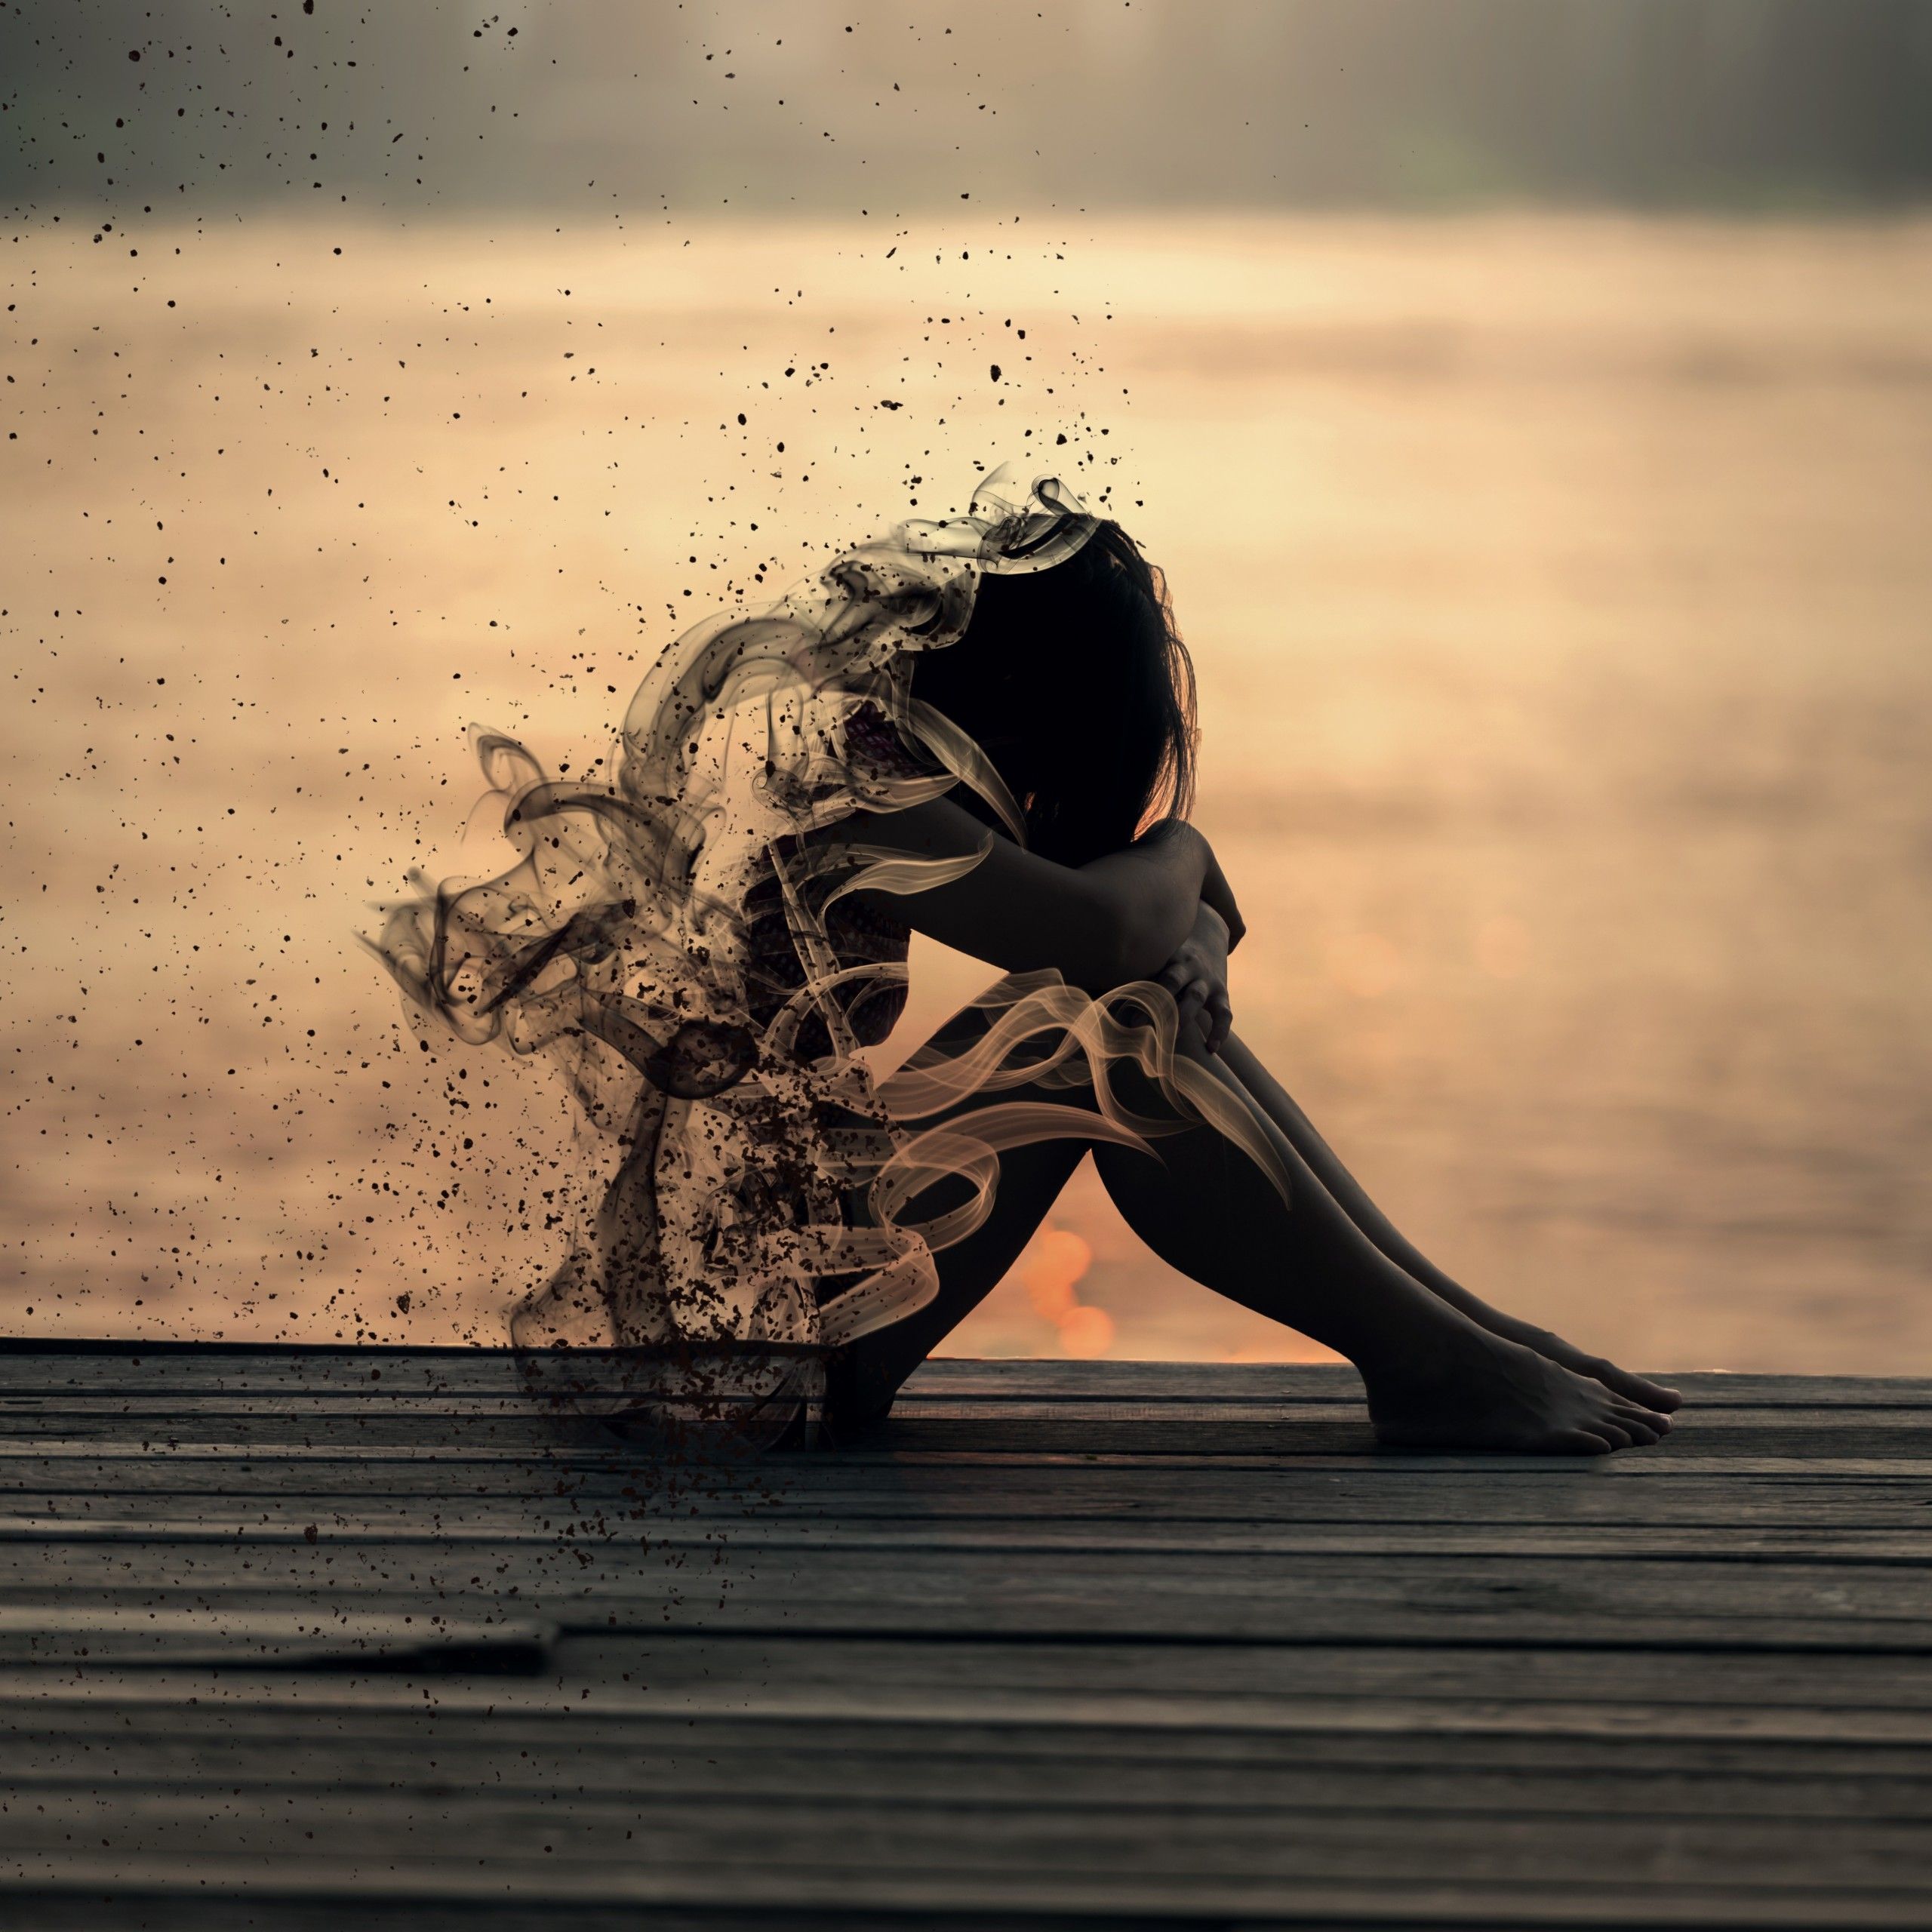 Download Free HD Sad Wallpapers For Girls For Broken Heart Alone Girl